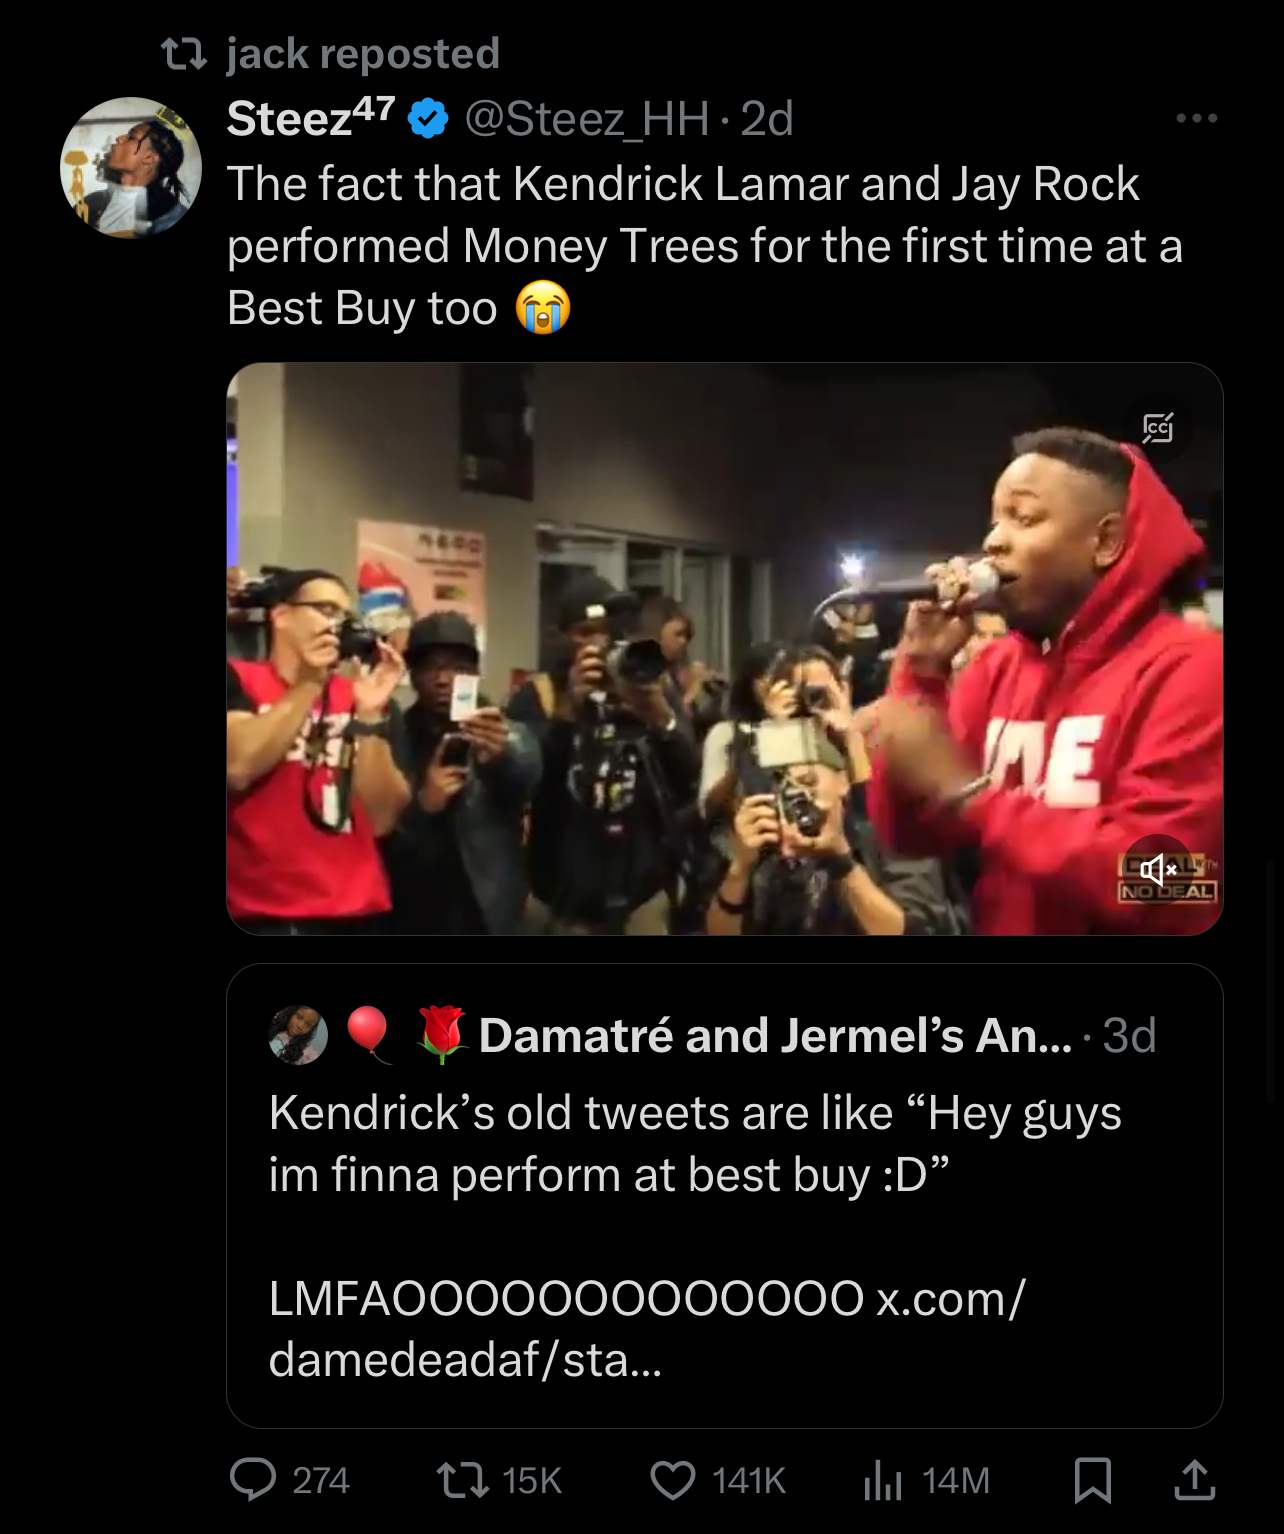 Kendrick Lamar and Jay Rock perform at a Best Buy, surrounded by fans recording on their phones